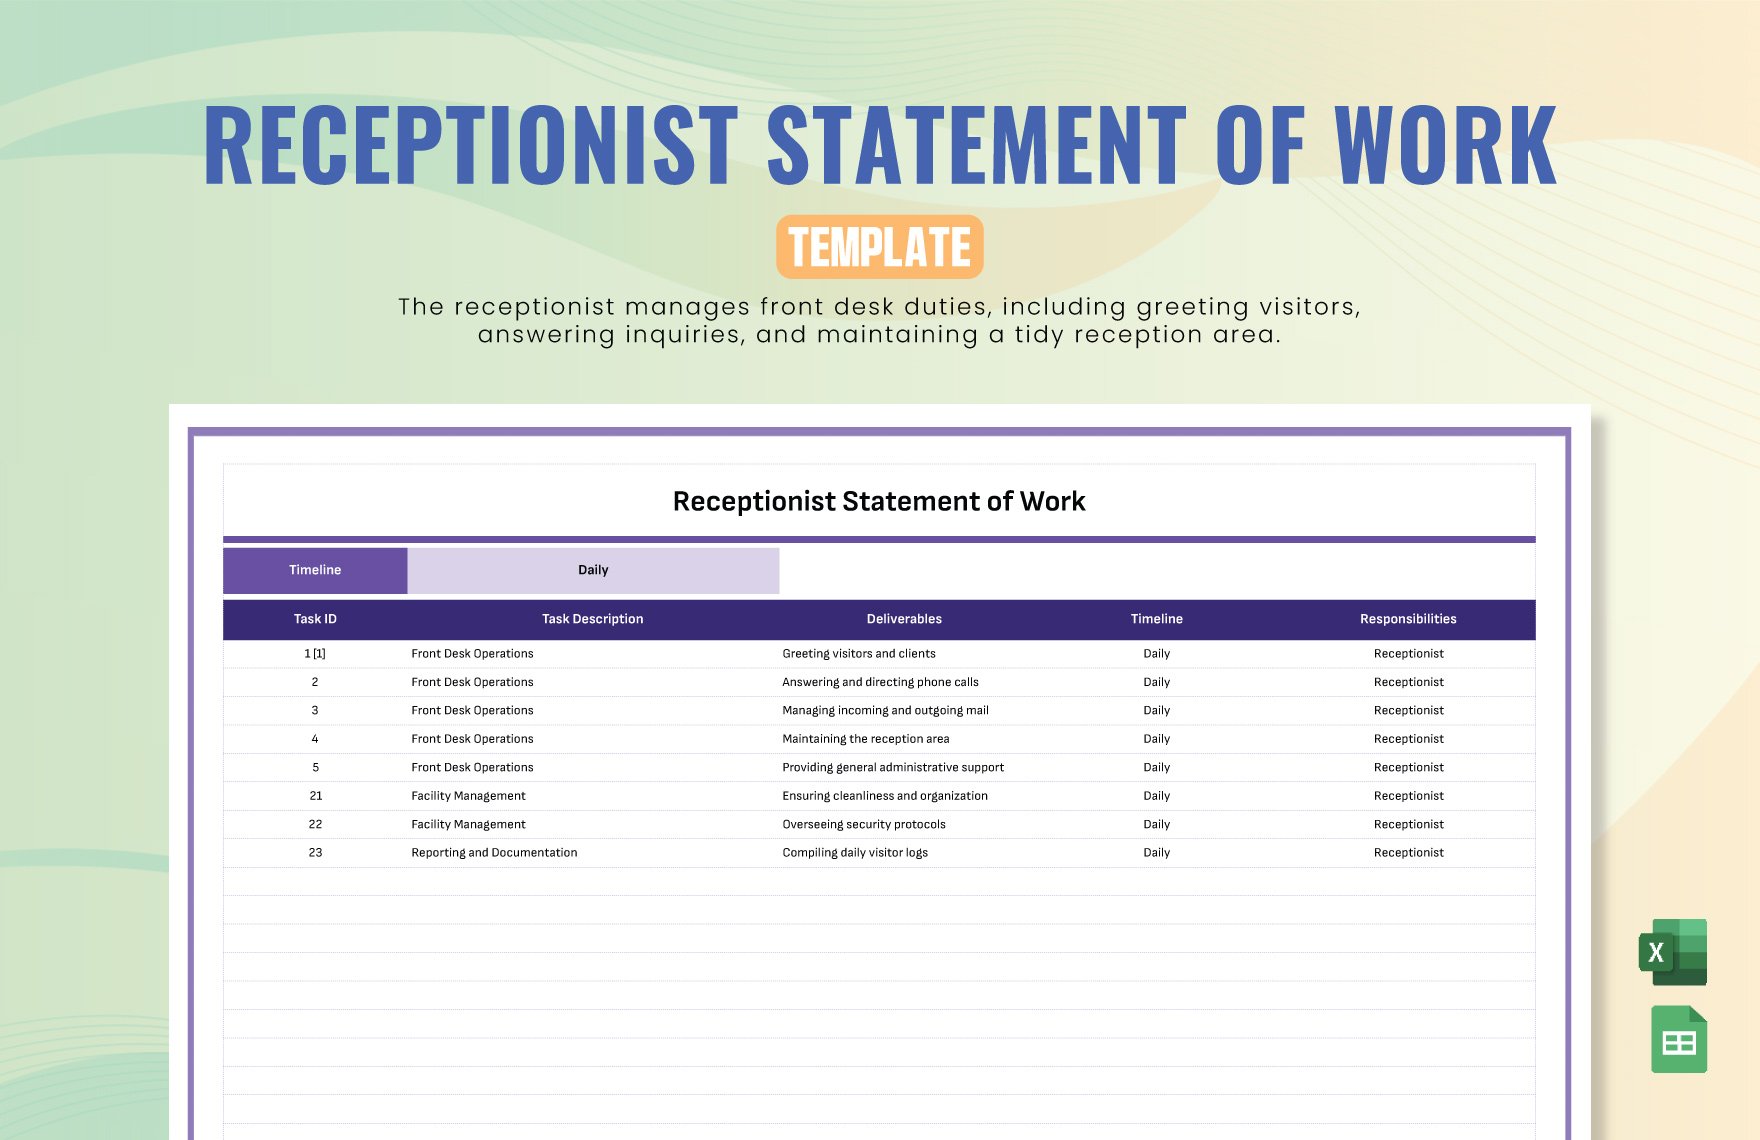 Receptionist Statement of Work Template in Excel, Google Sheets